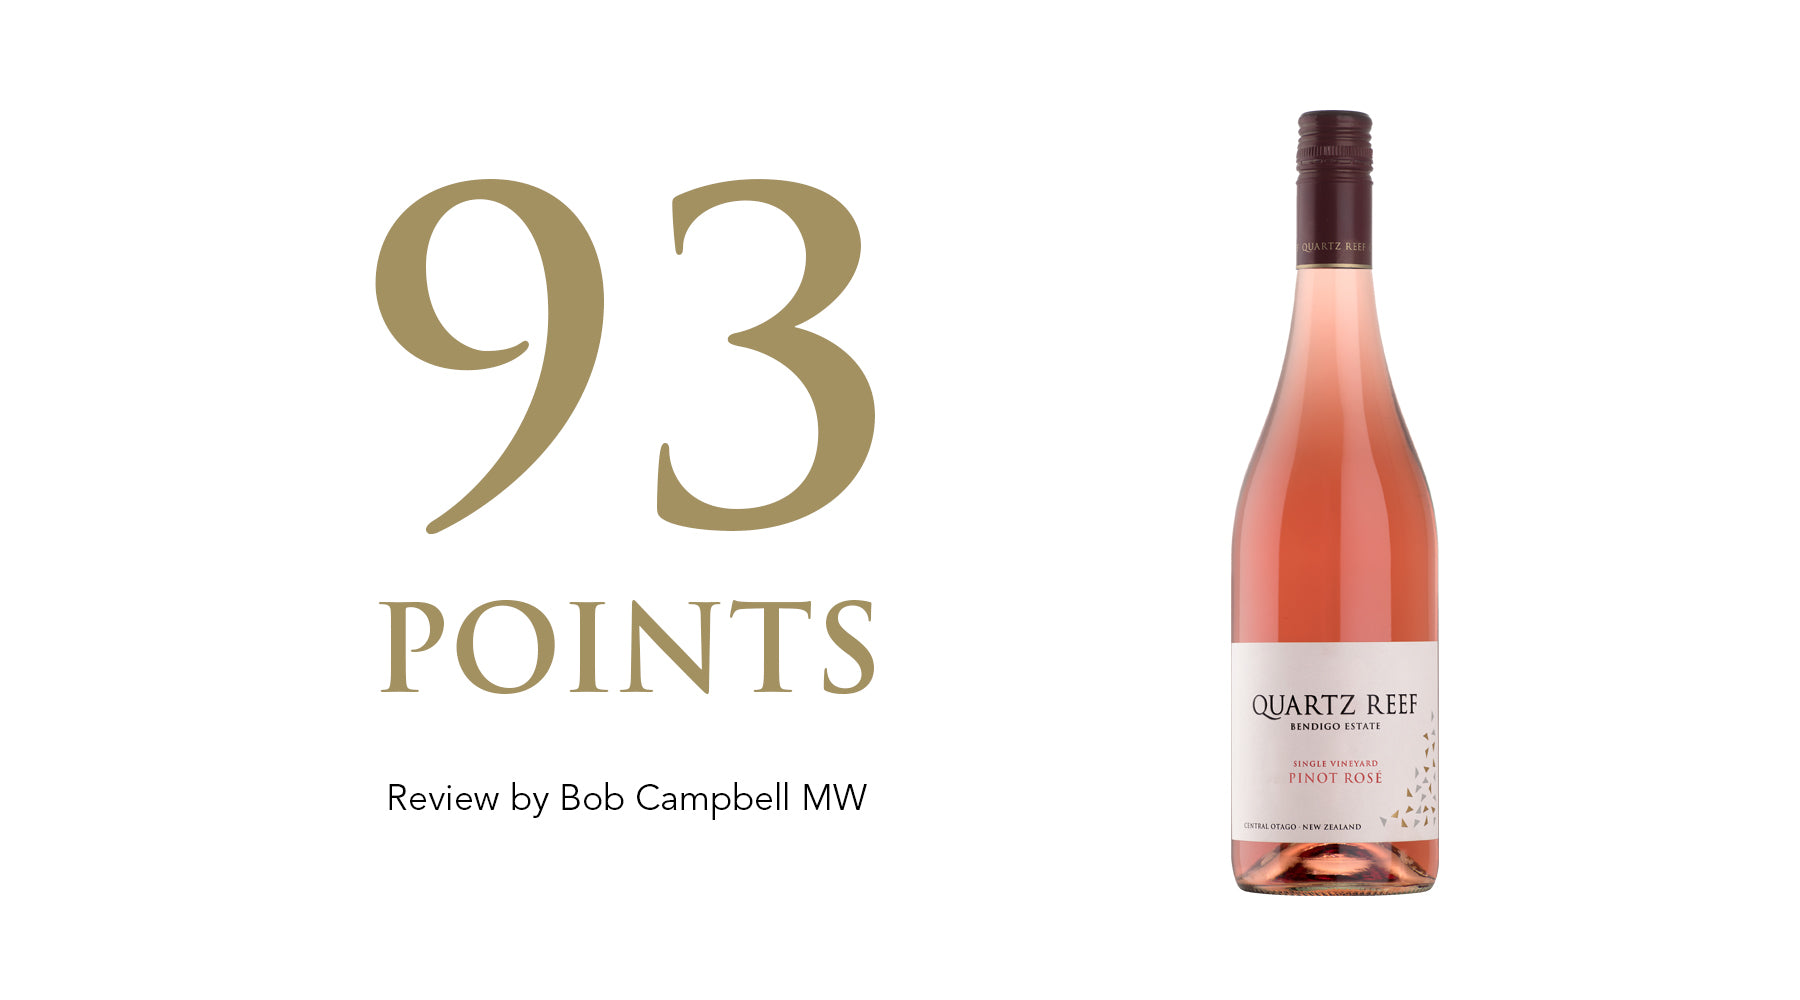 Pinot Rosé 2020 - Awarded 93 Points